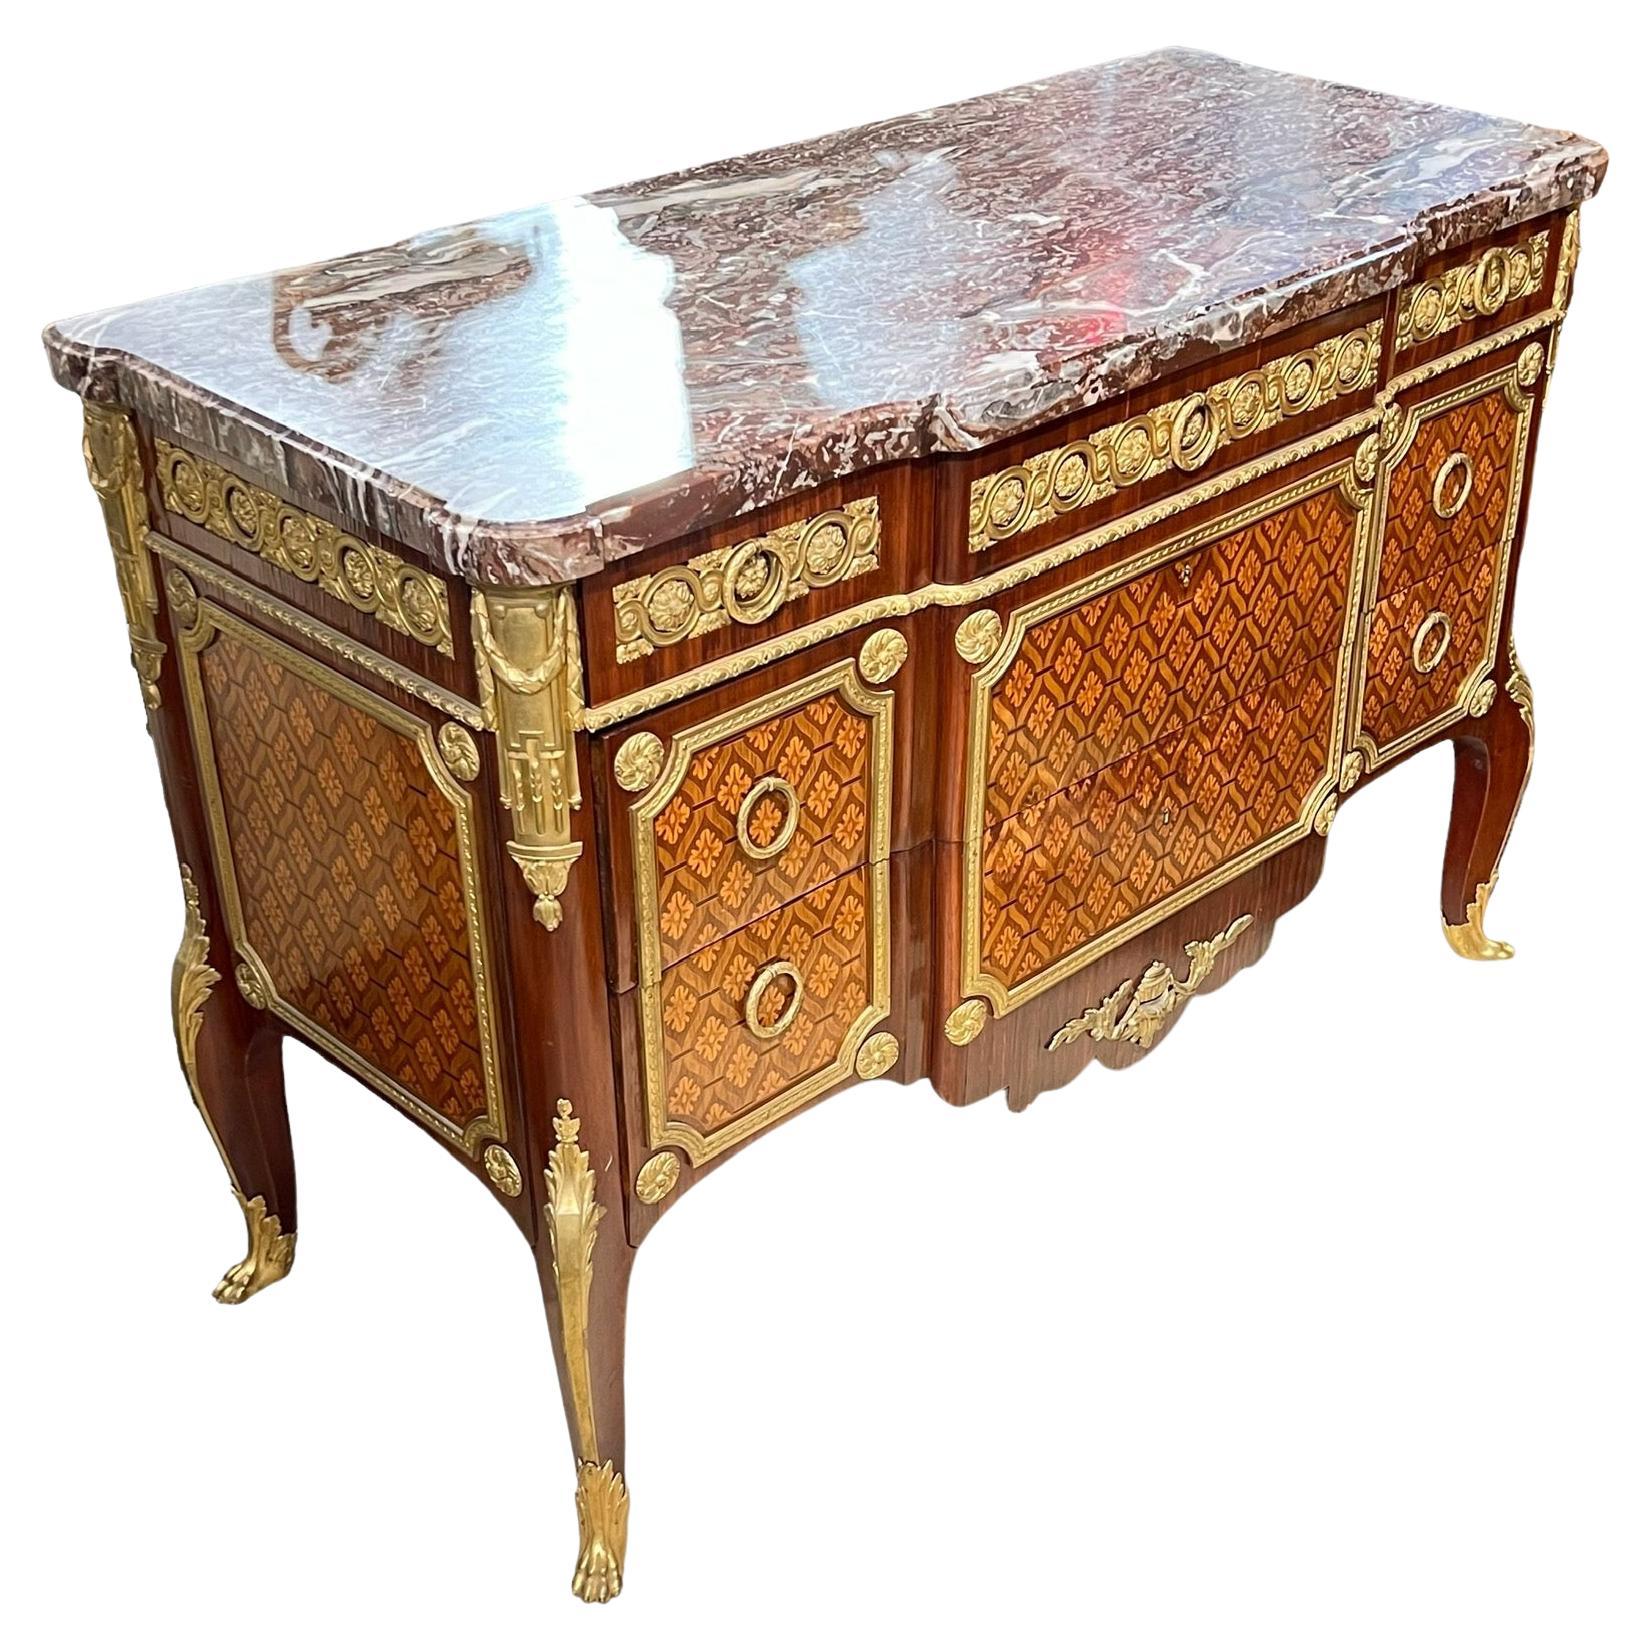 Magnificent French Louis XVI Style Marquetry Inlaid Marble Top Commode For Sale